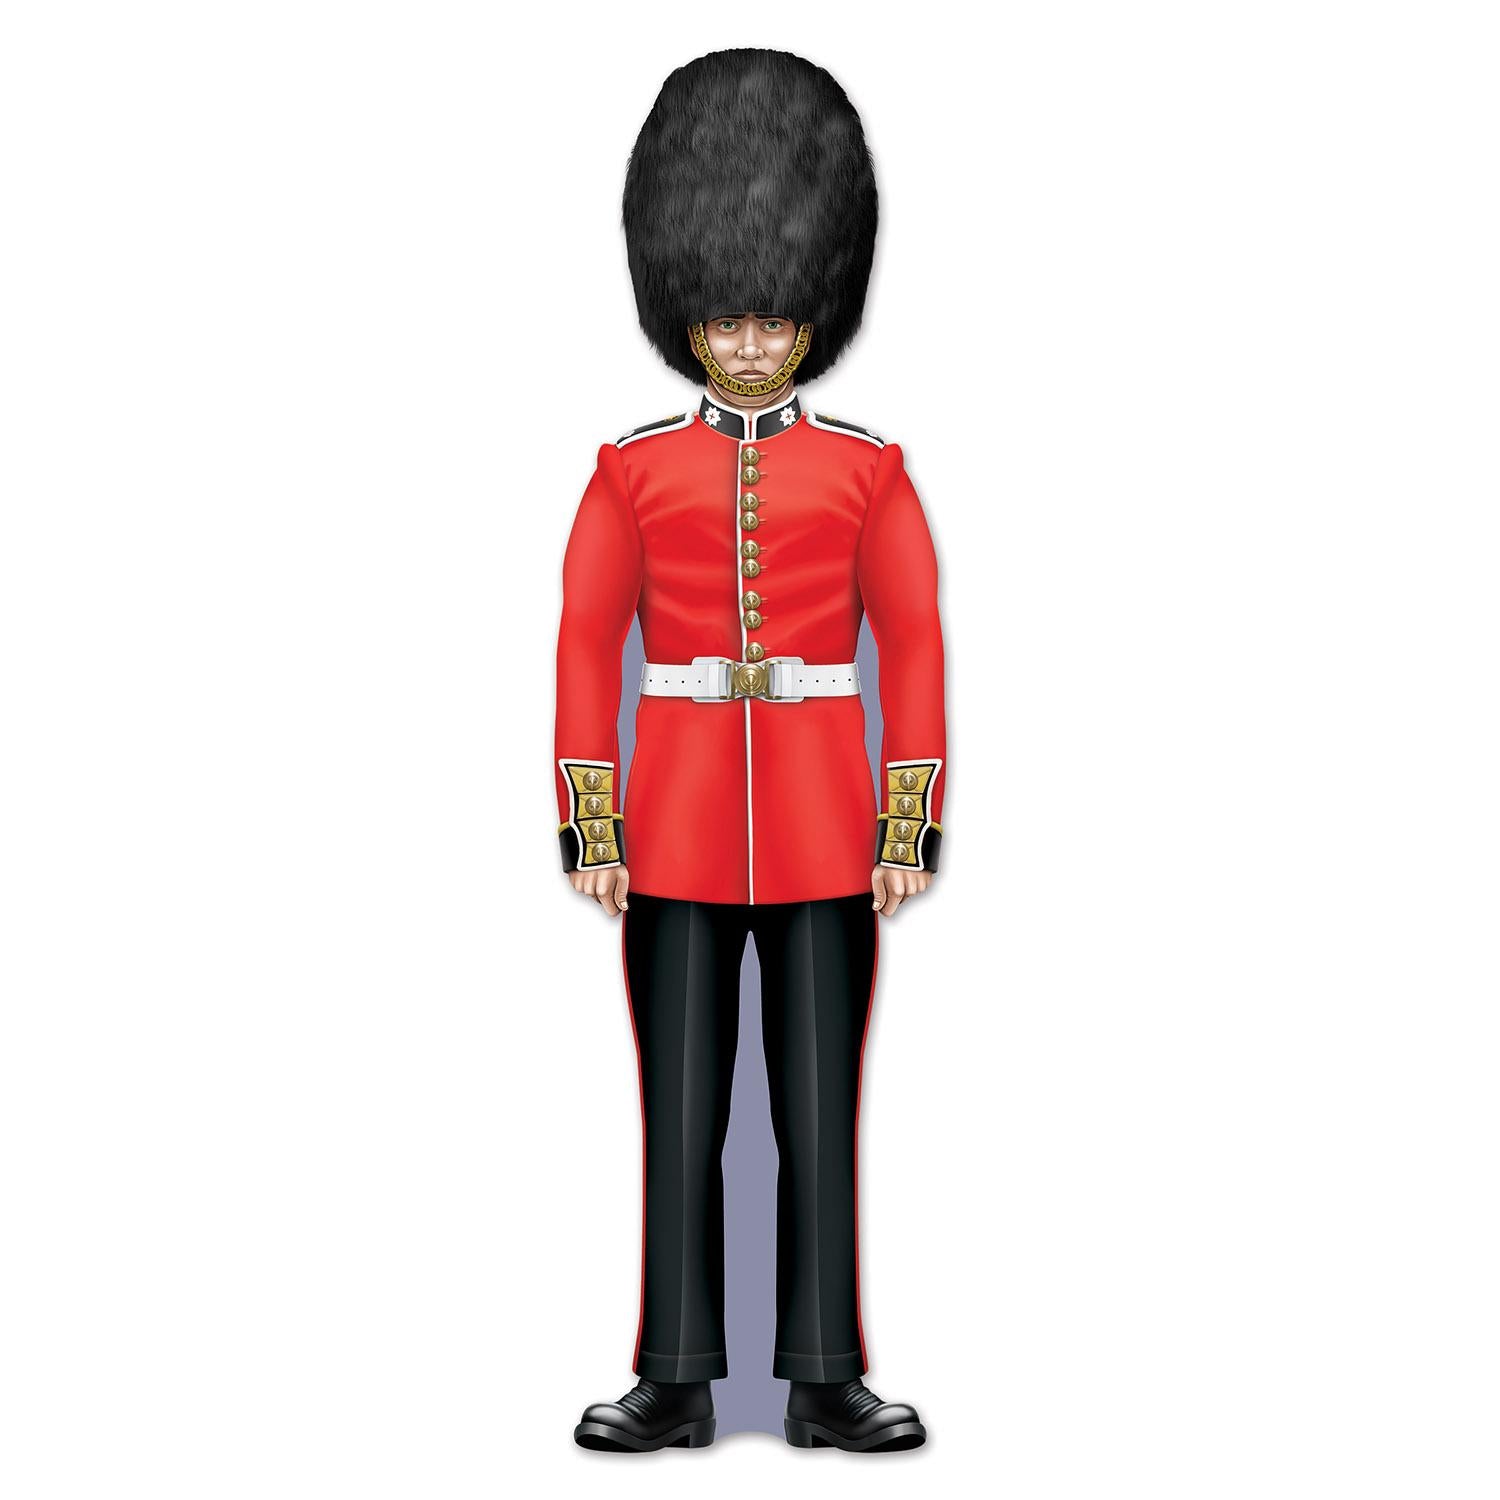 Beistle Royal Guard Party Cutout